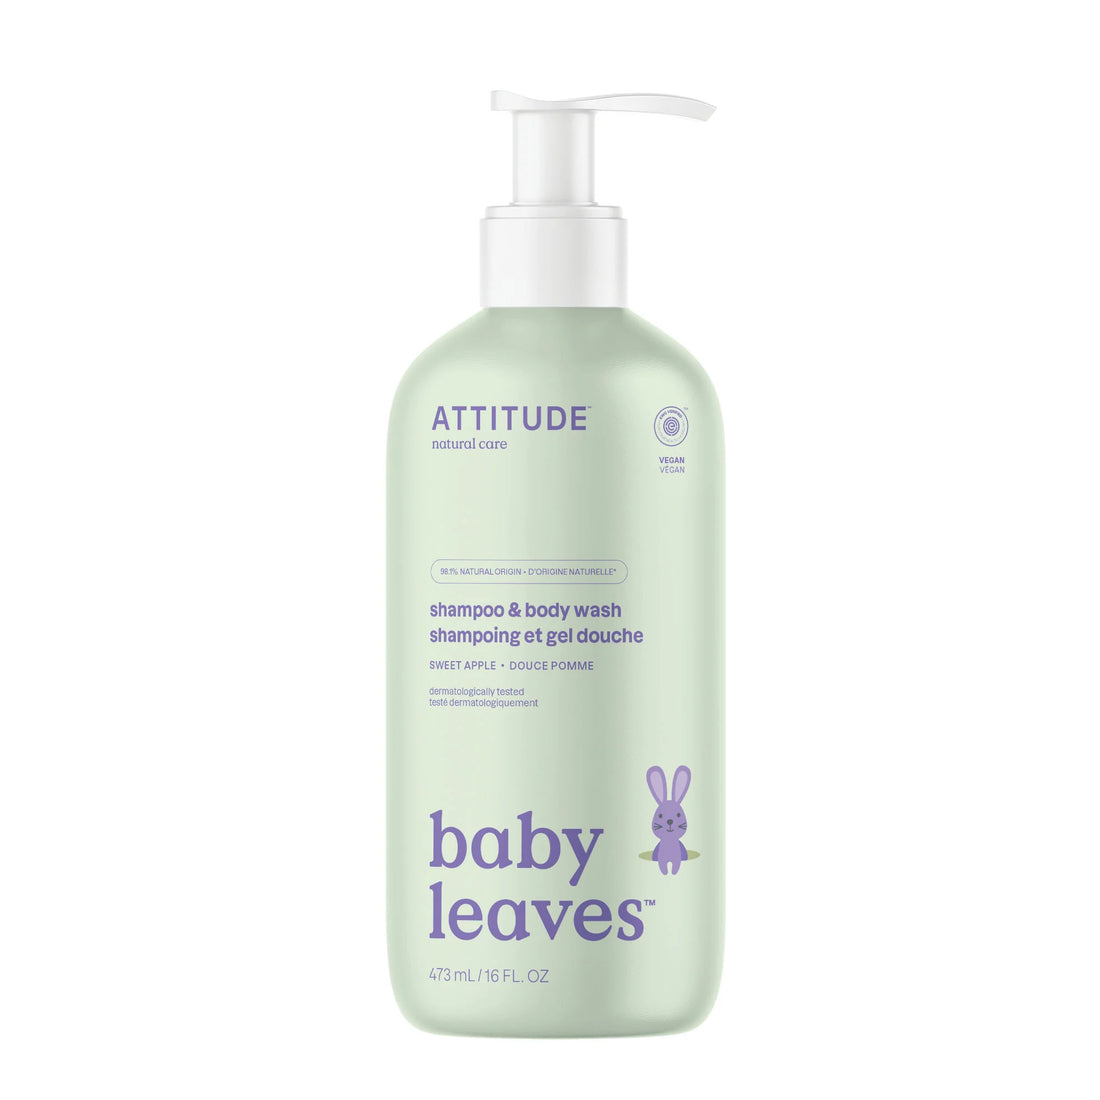 Baby Leaves 2 in 1 Shampoo & Body Wash